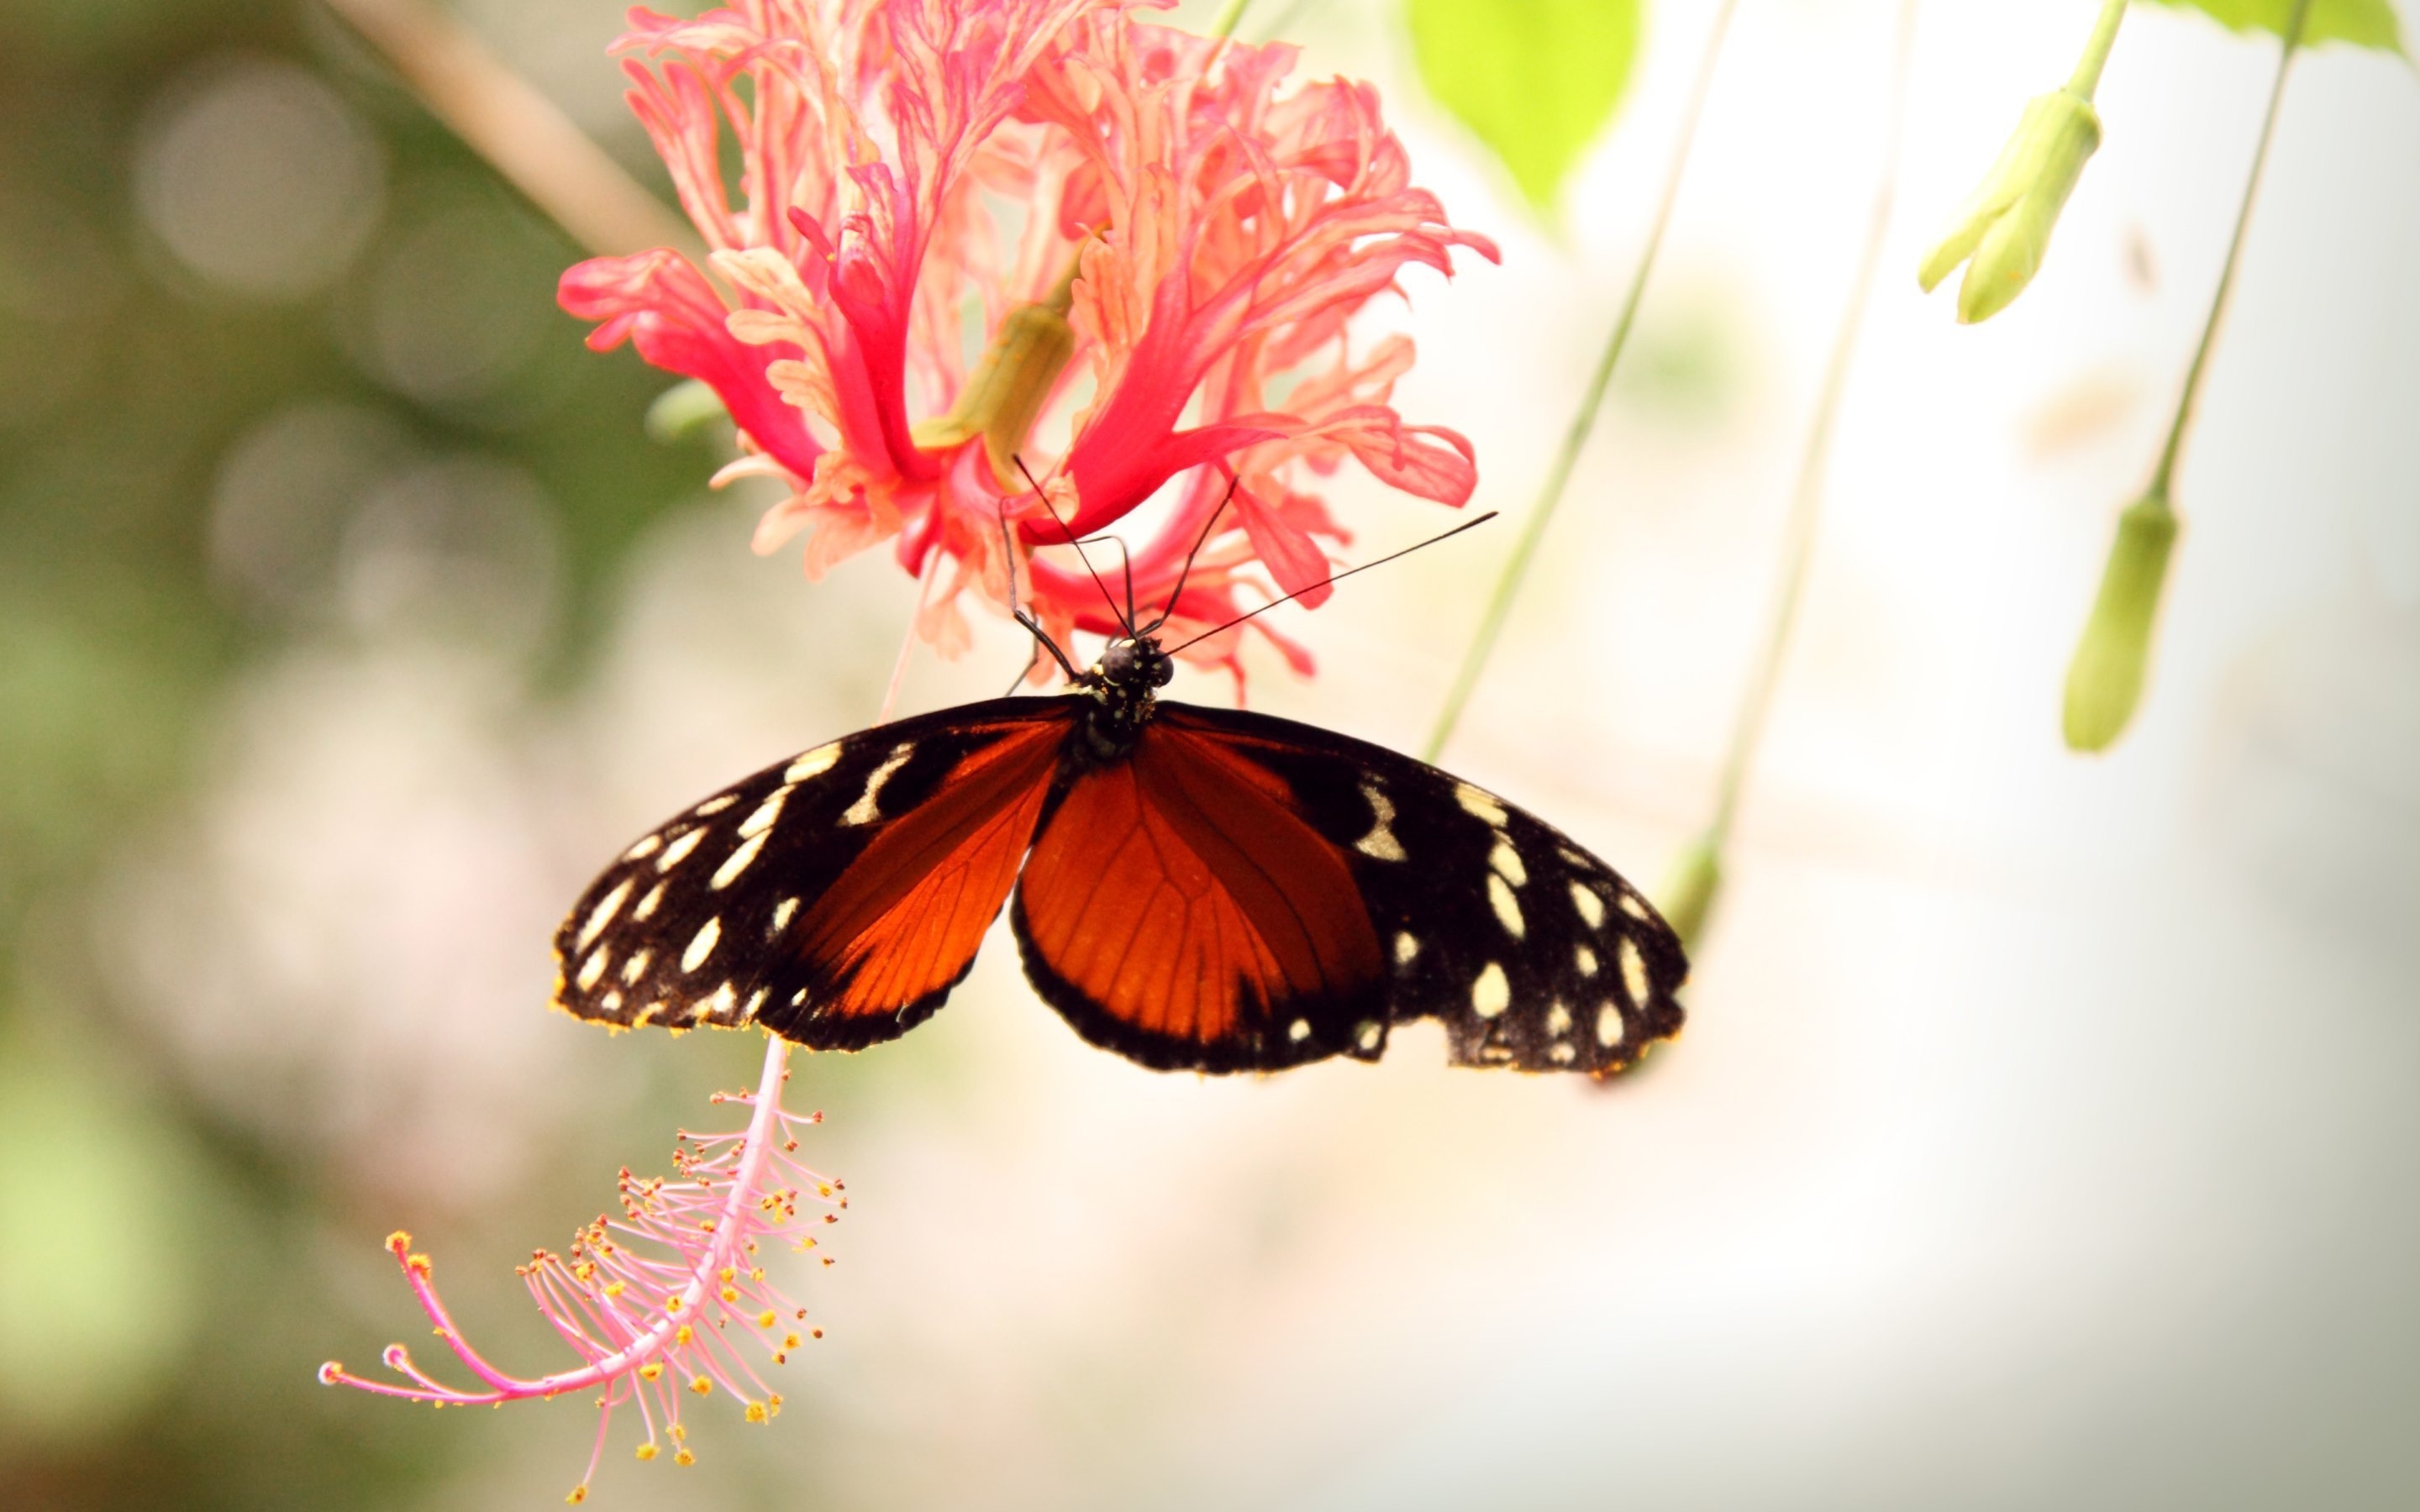 Butterfly on a Flower for 2880 x 1800 Retina Display resolution